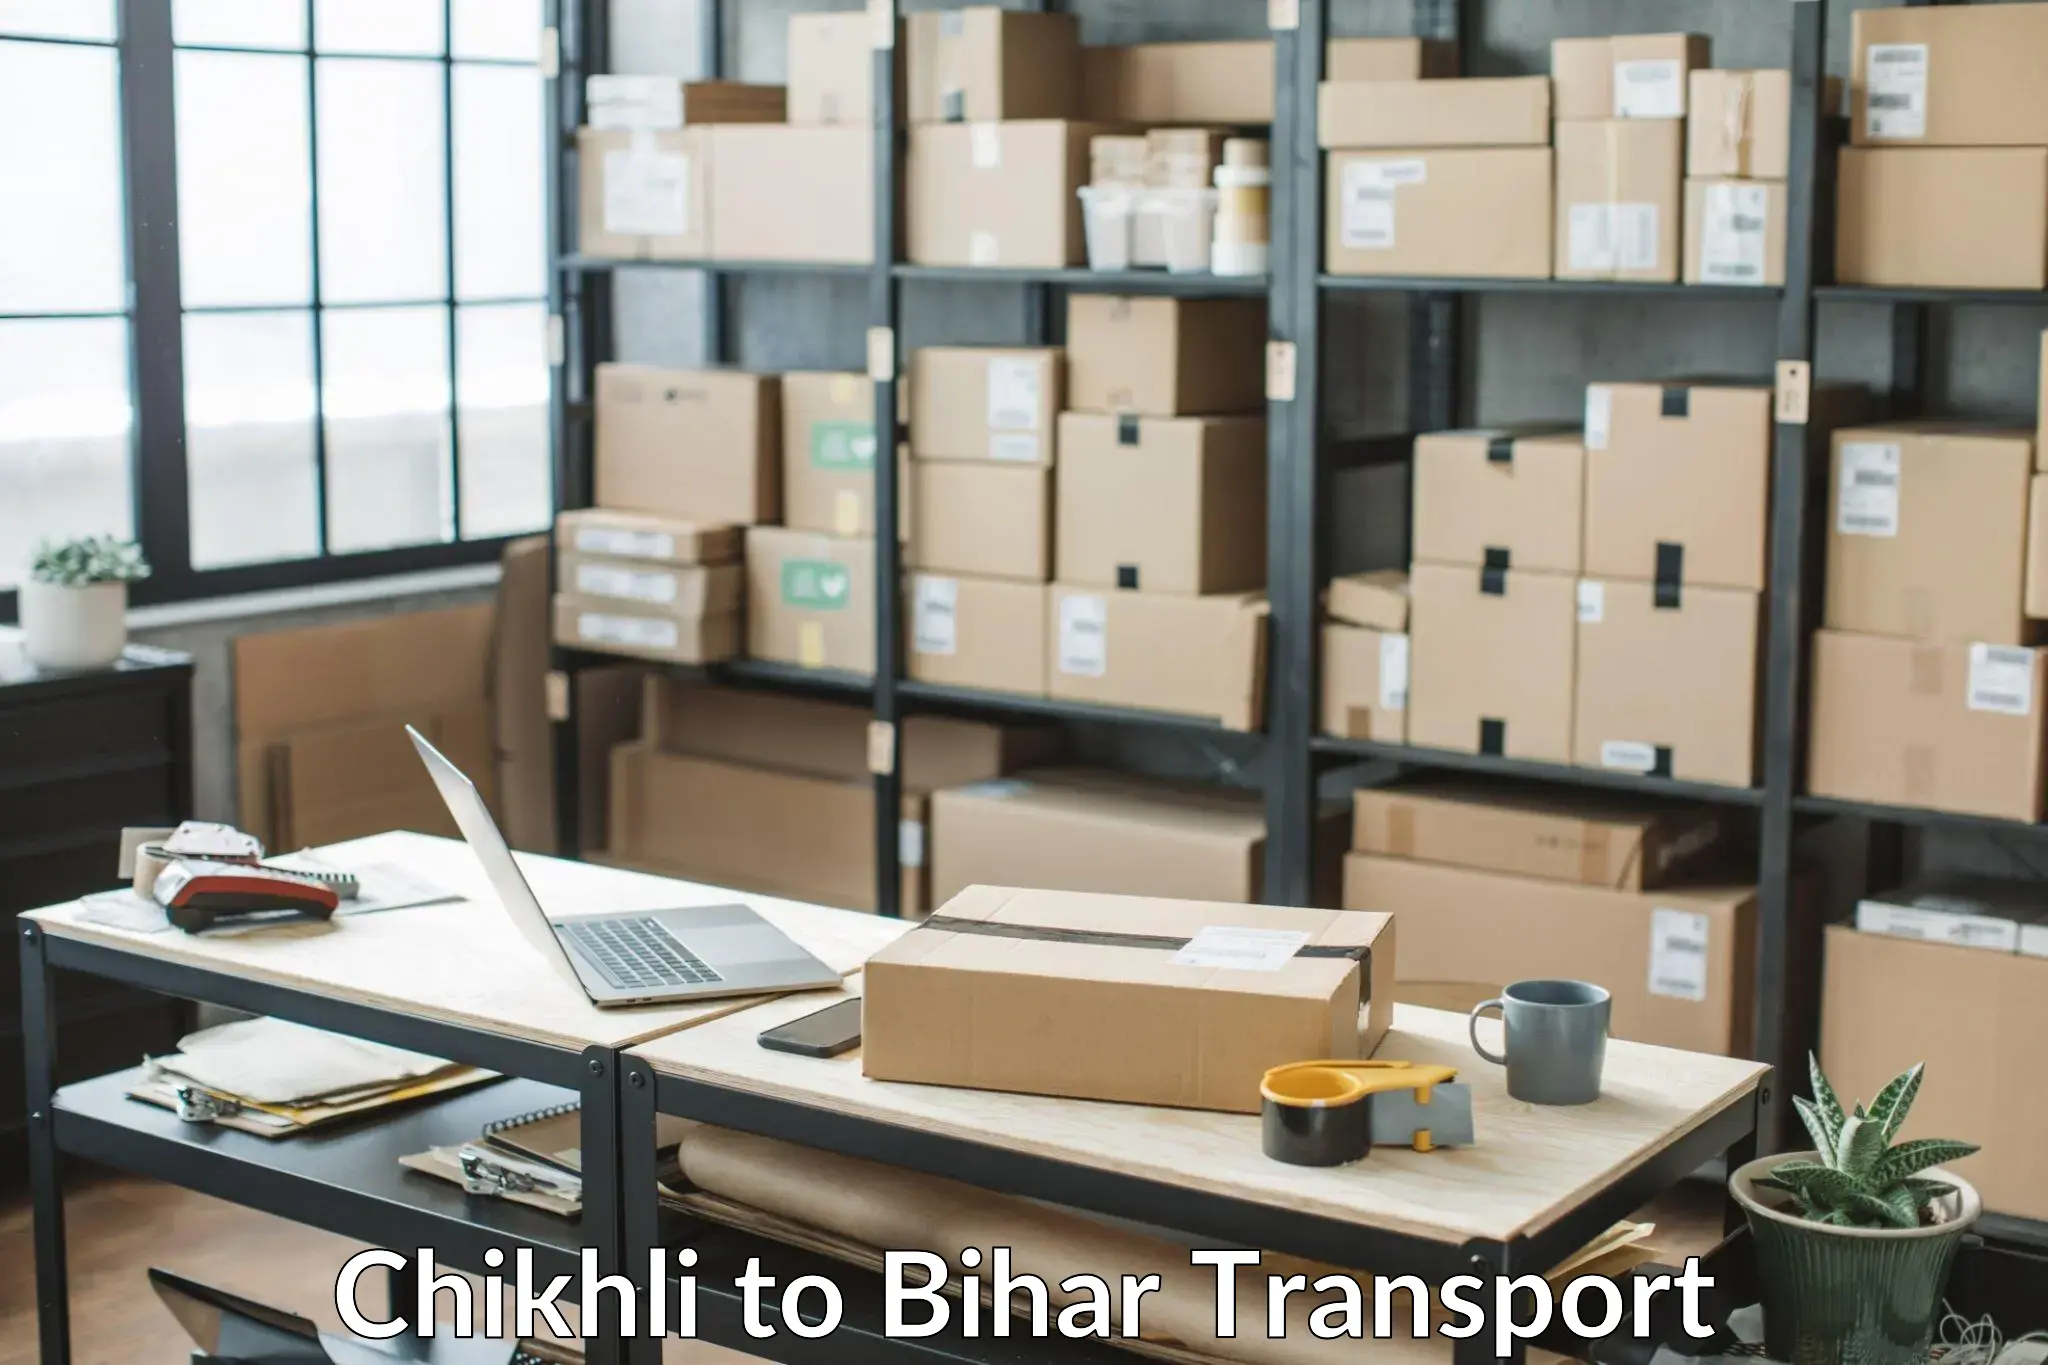 Nationwide transport services Chikhli to Bihar